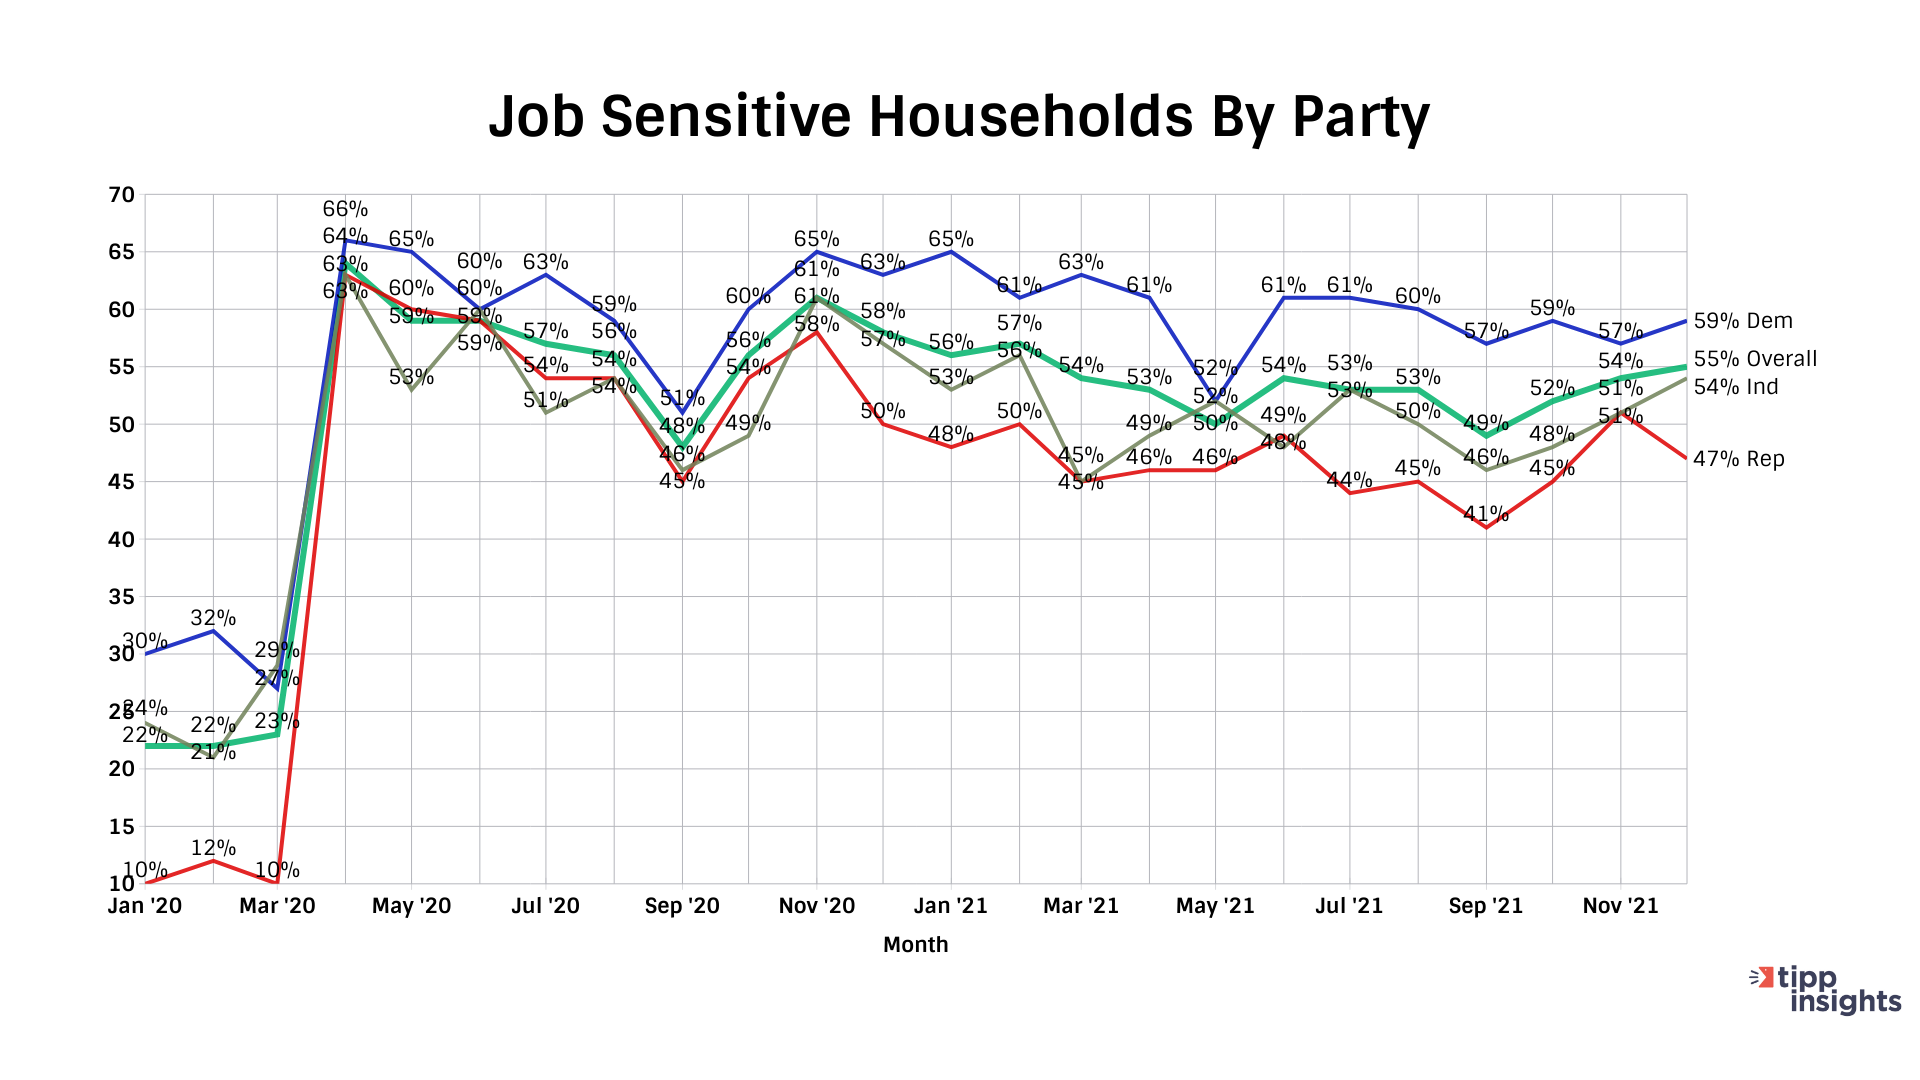 IBD/TIPP Poll Results: Job Sensitive households in the United States by political party